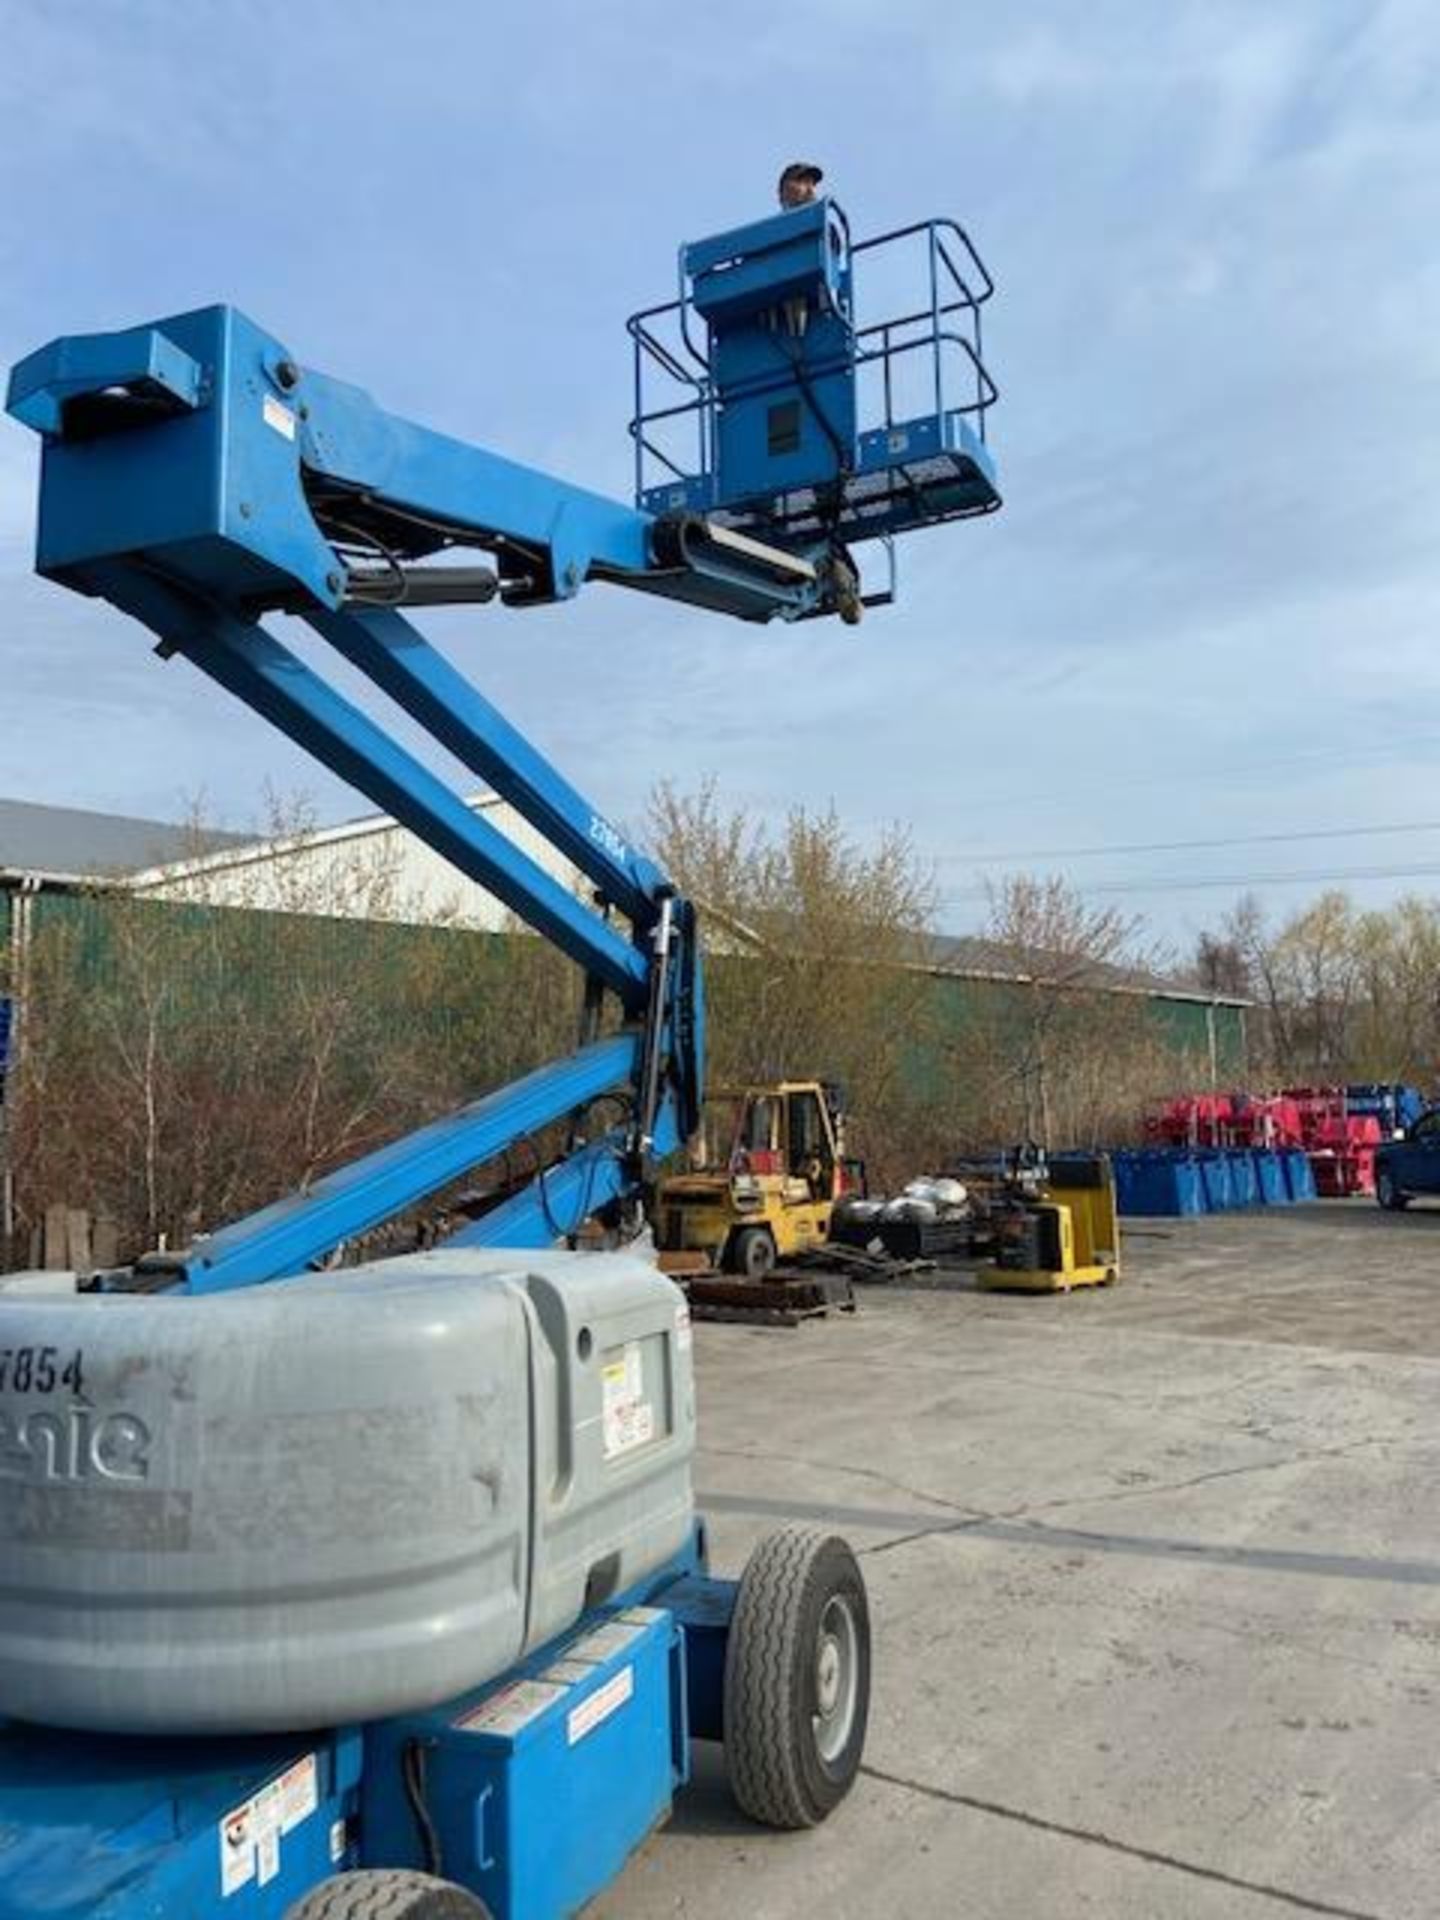 FREE CUSTOMS MINT 2006 Genie Zoom Boom Articulating Lift model Z45/25 45' height Electric LOW HOURS